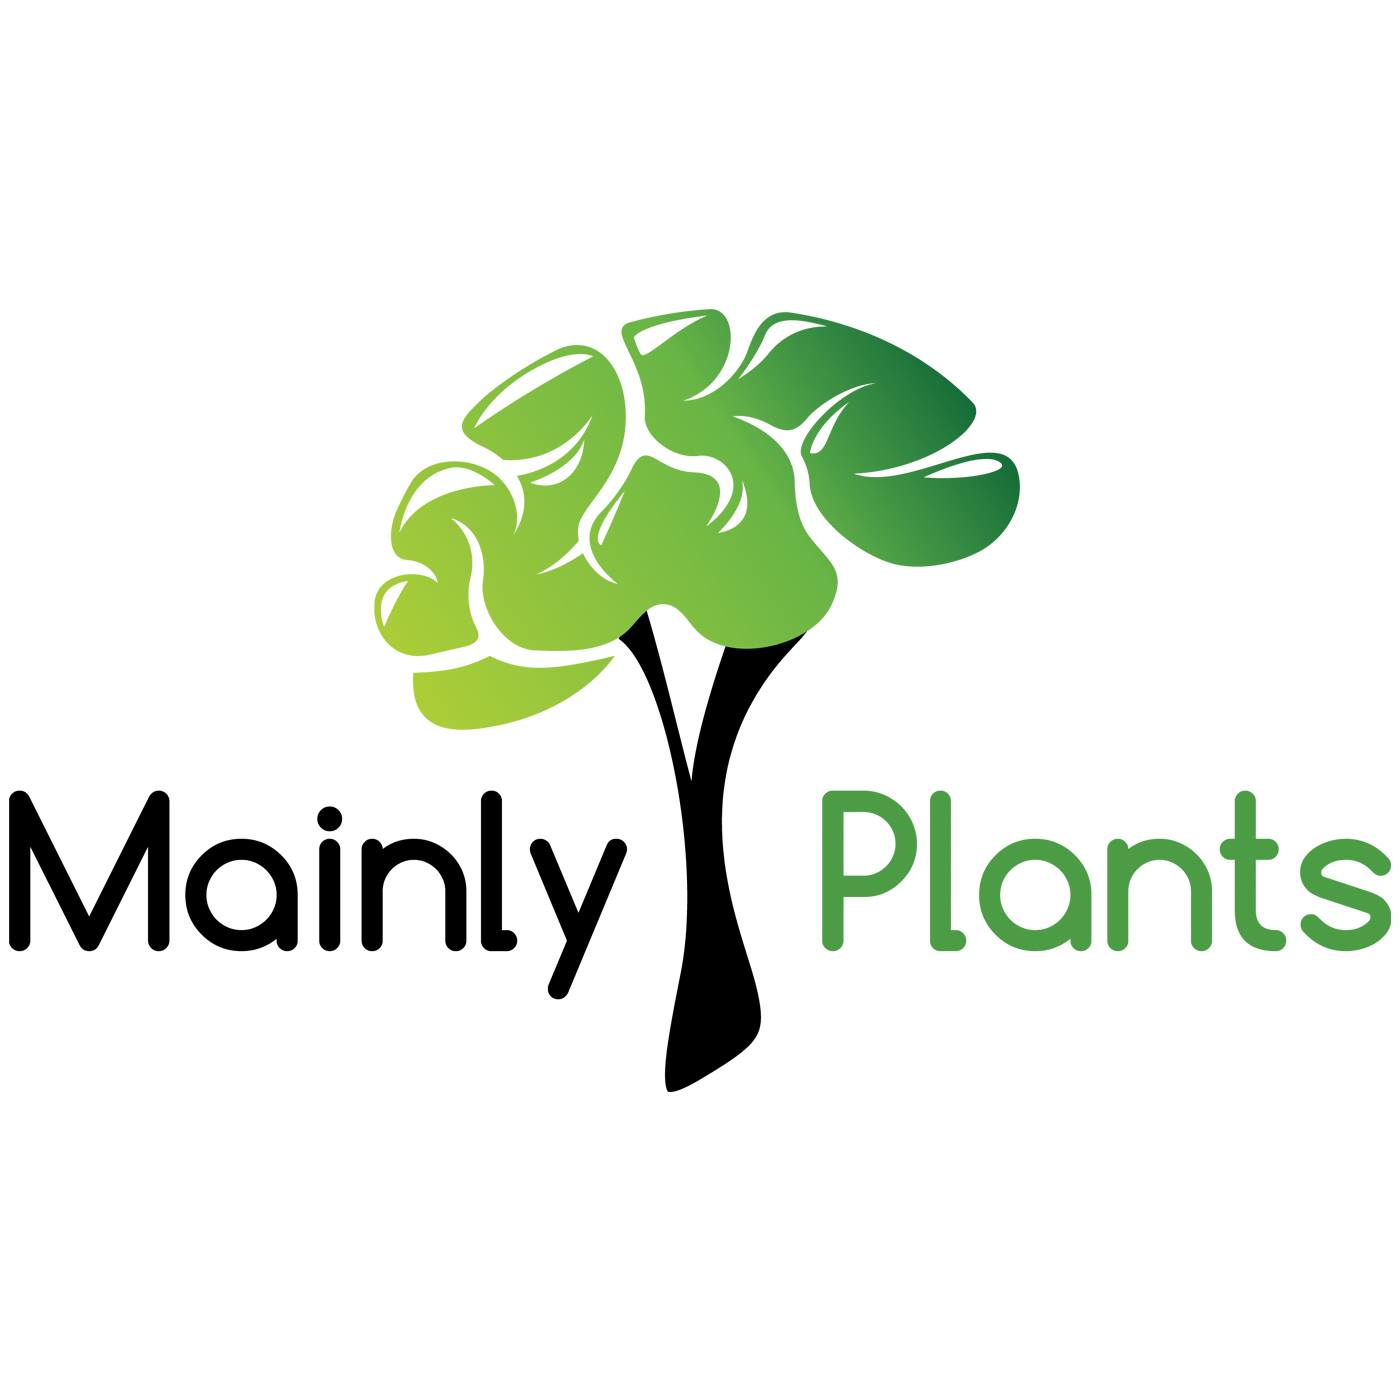 Mainly Plants Podcast